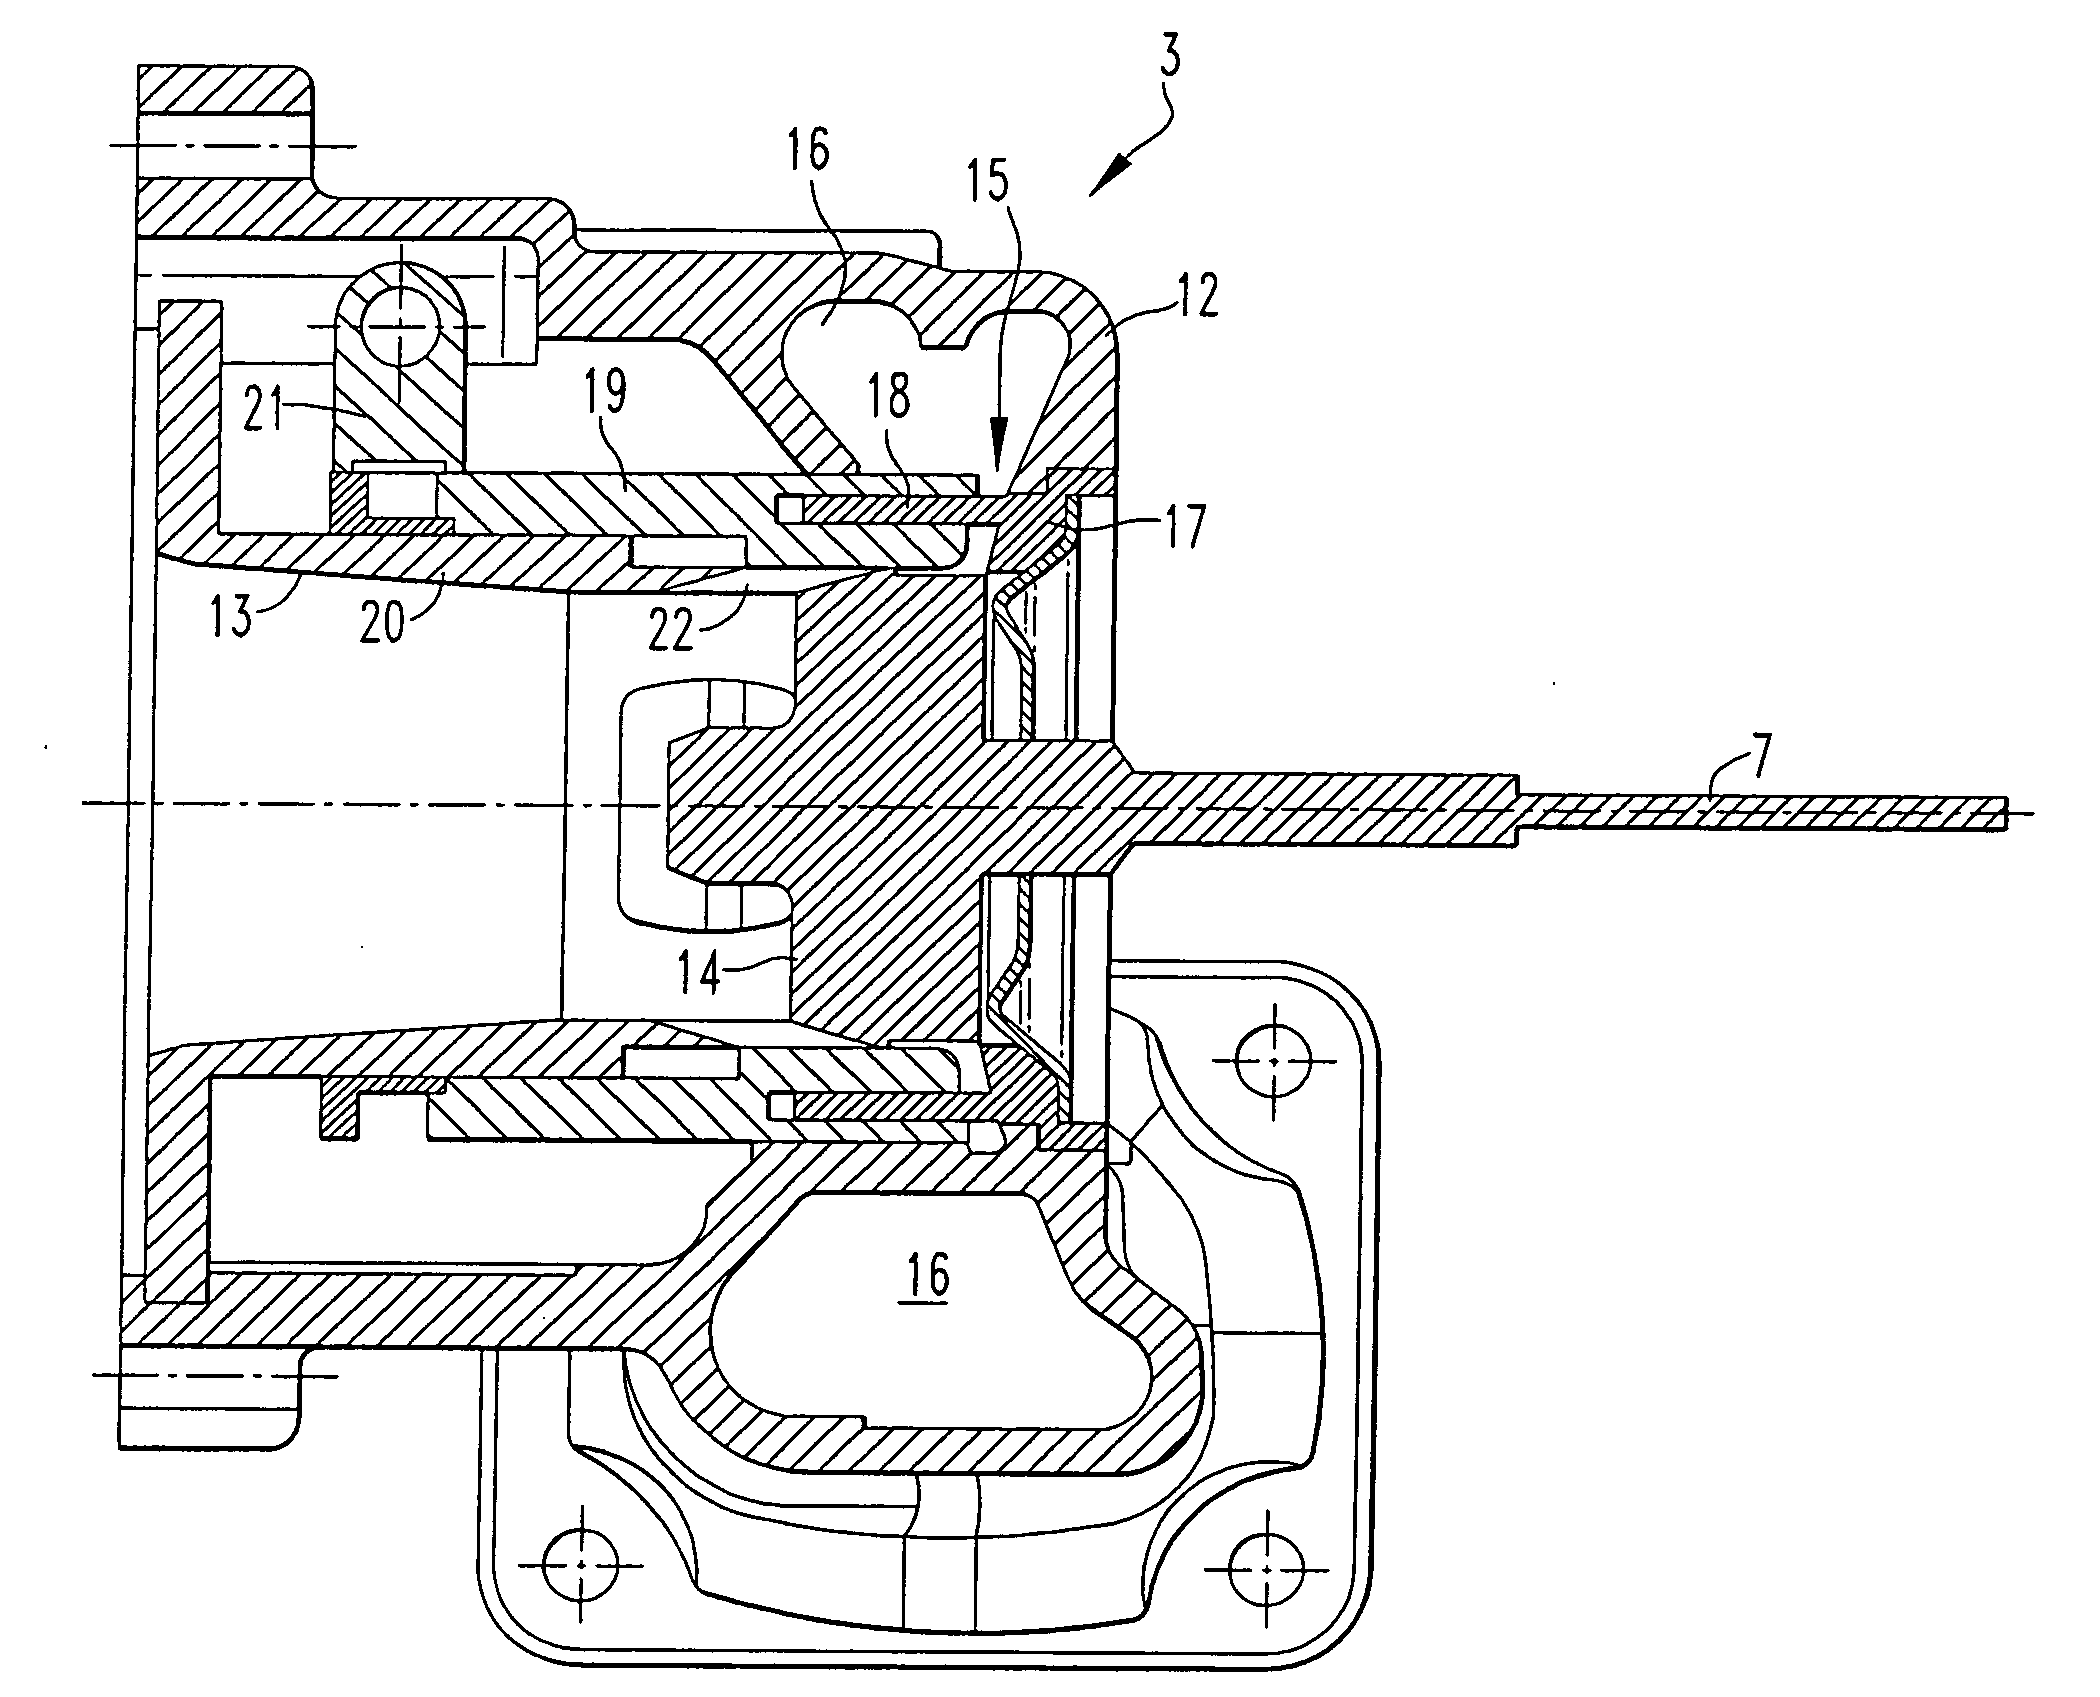 Exhaust-gas turbine in an exhaust-gas turbocharger